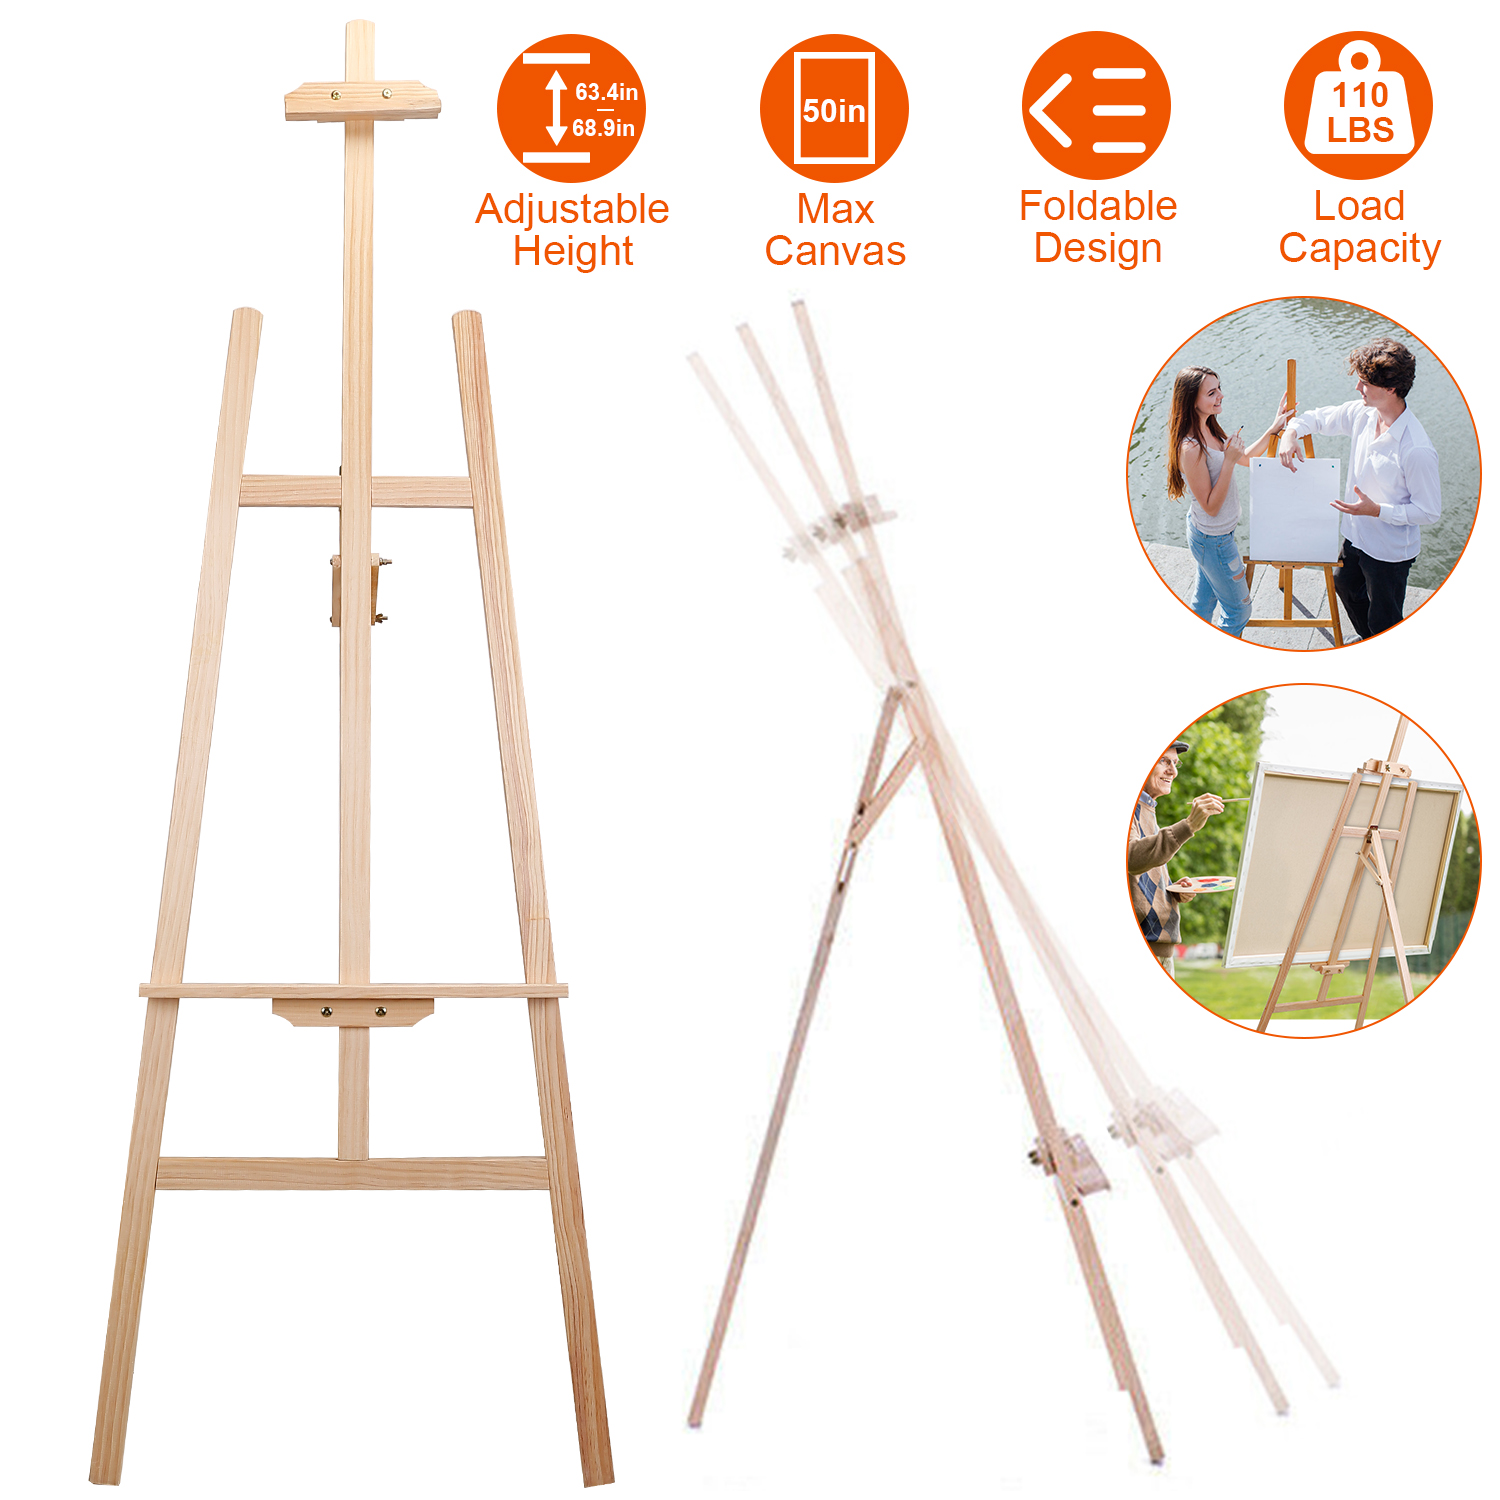 iMounTEK Painting Easel Stand Wooden Inclinable A Frame Tripod Easel  Drawing Stand with 63.4 in-68.9in Adjustable Height Hold Canvas up to 50in  